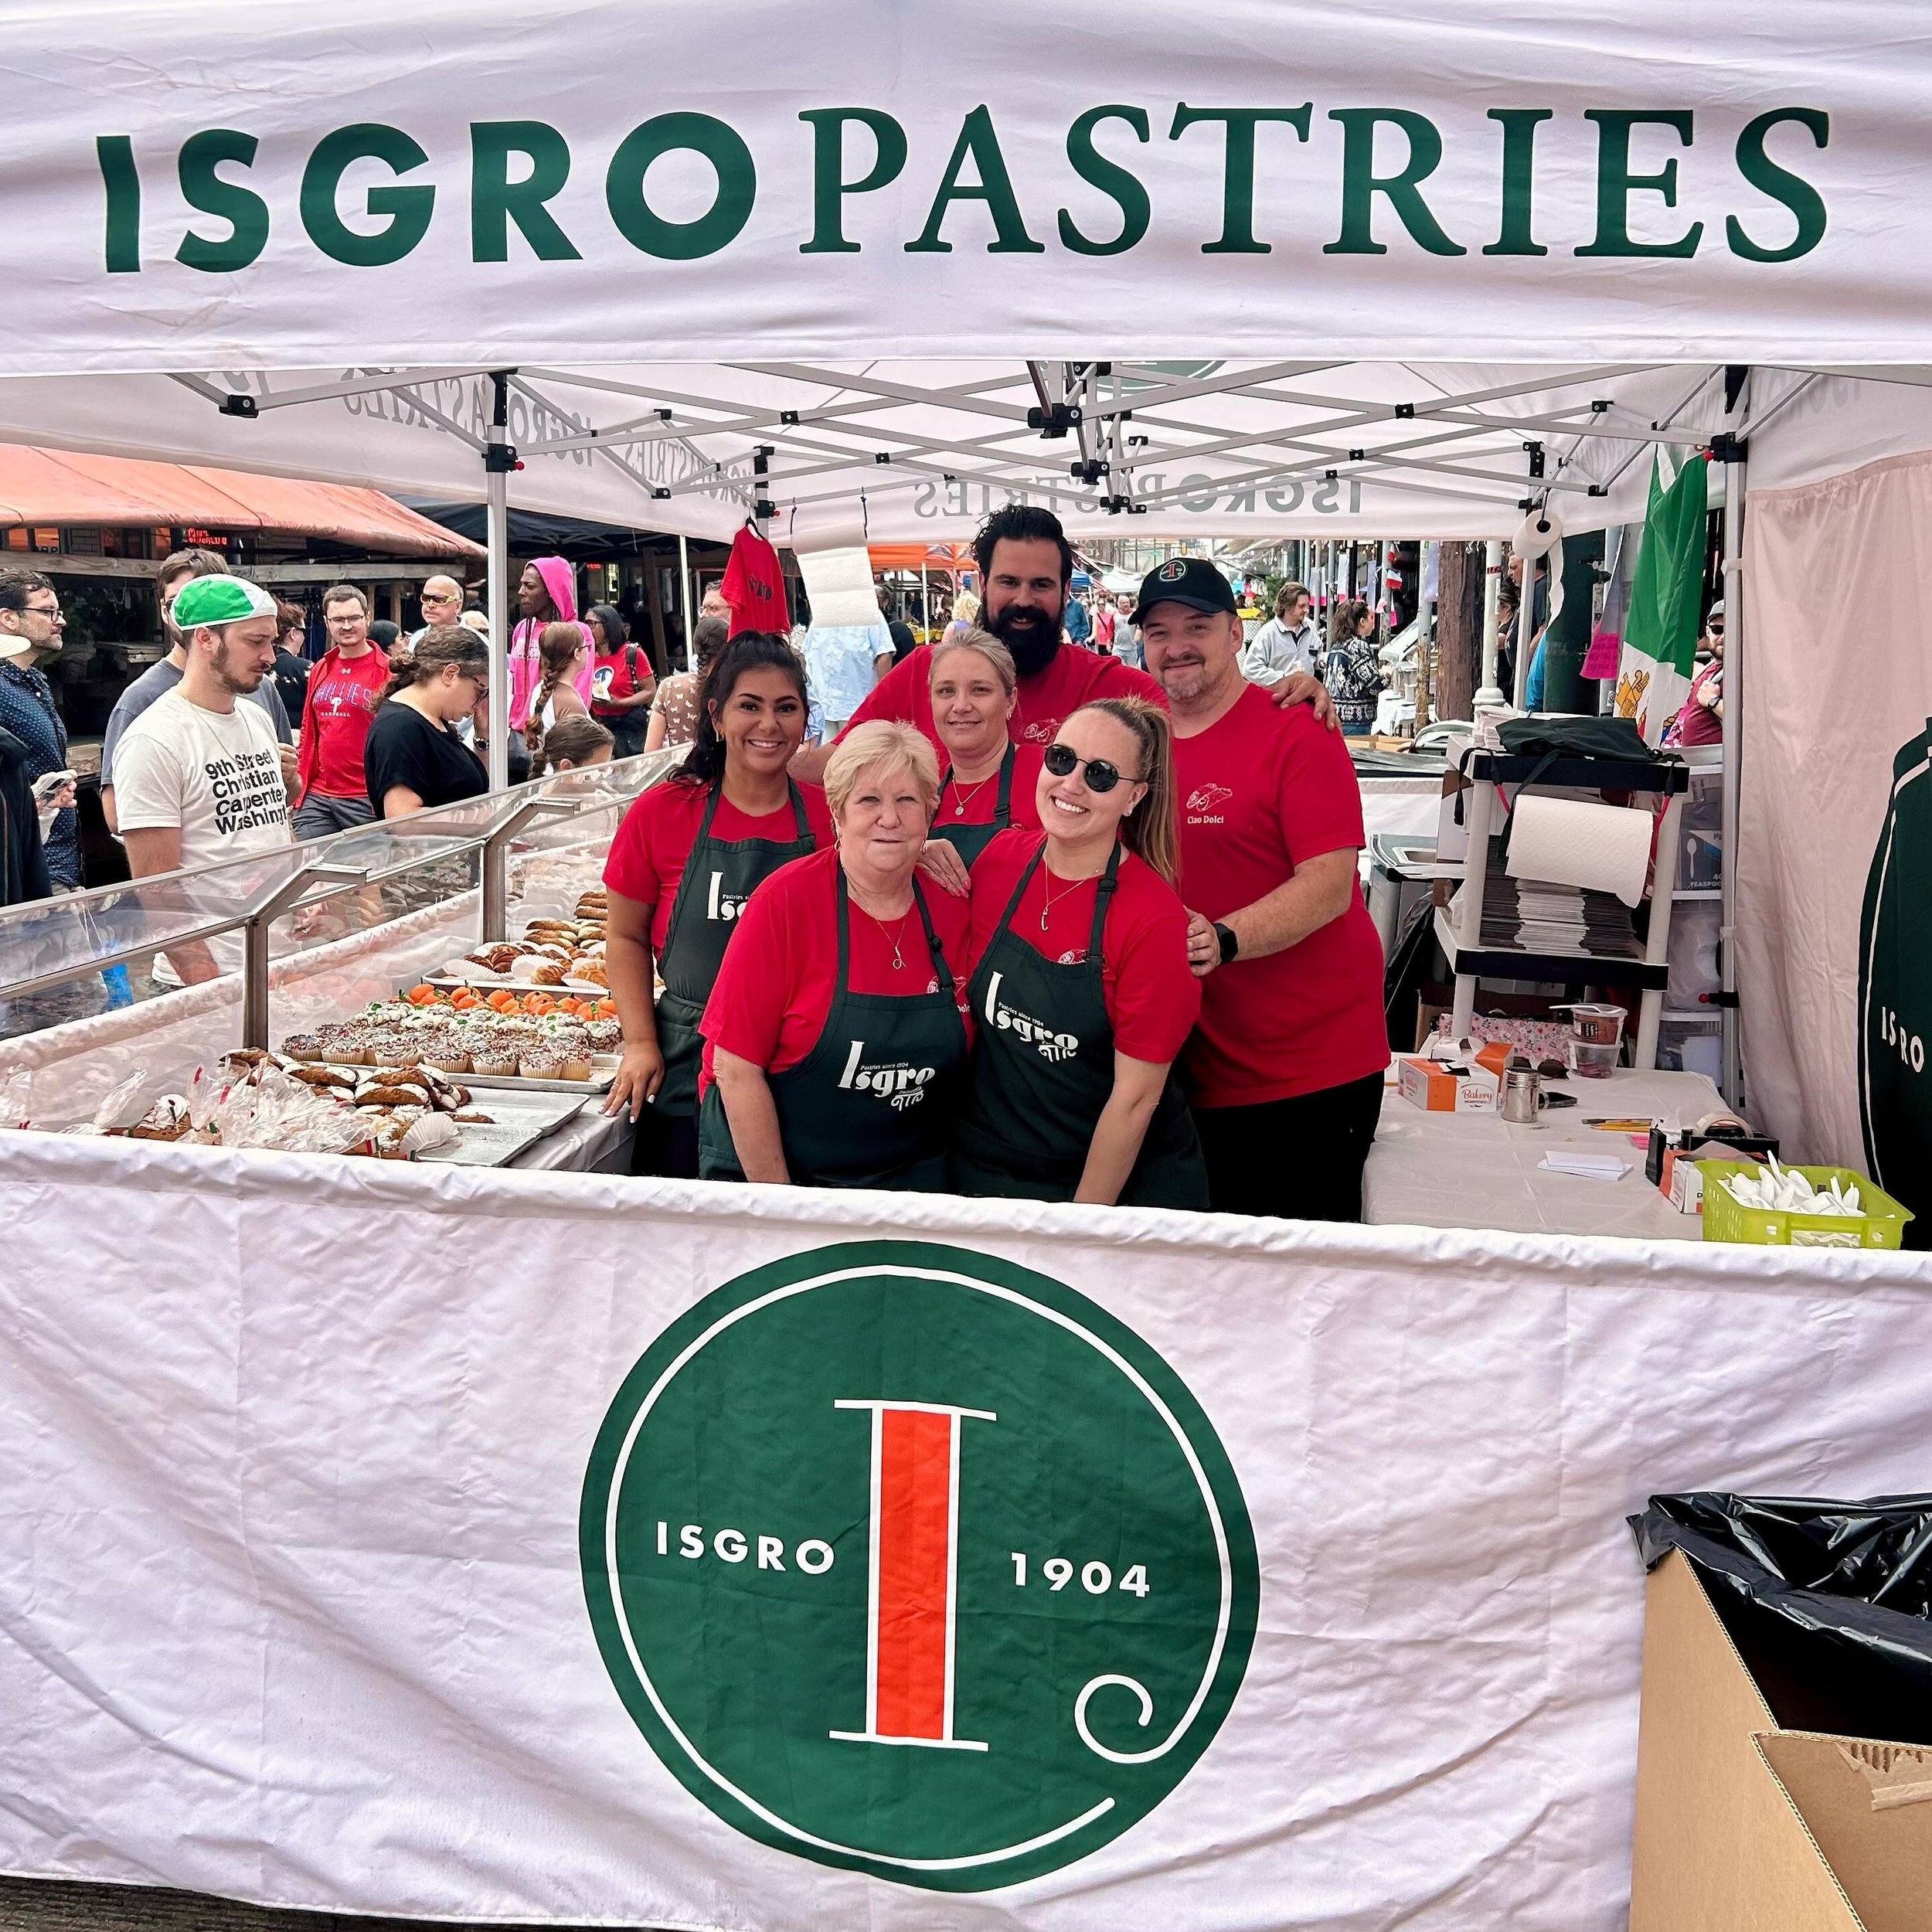 The 9th Street Italian Market Festival count down has begun! Join us this weekend 5/18 &amp; 5/19 for the 2 day party featuring live music, entertainment &amp; most importantly good food. 

#italianmarket #italianmarketphilly #italianmarketfestival #